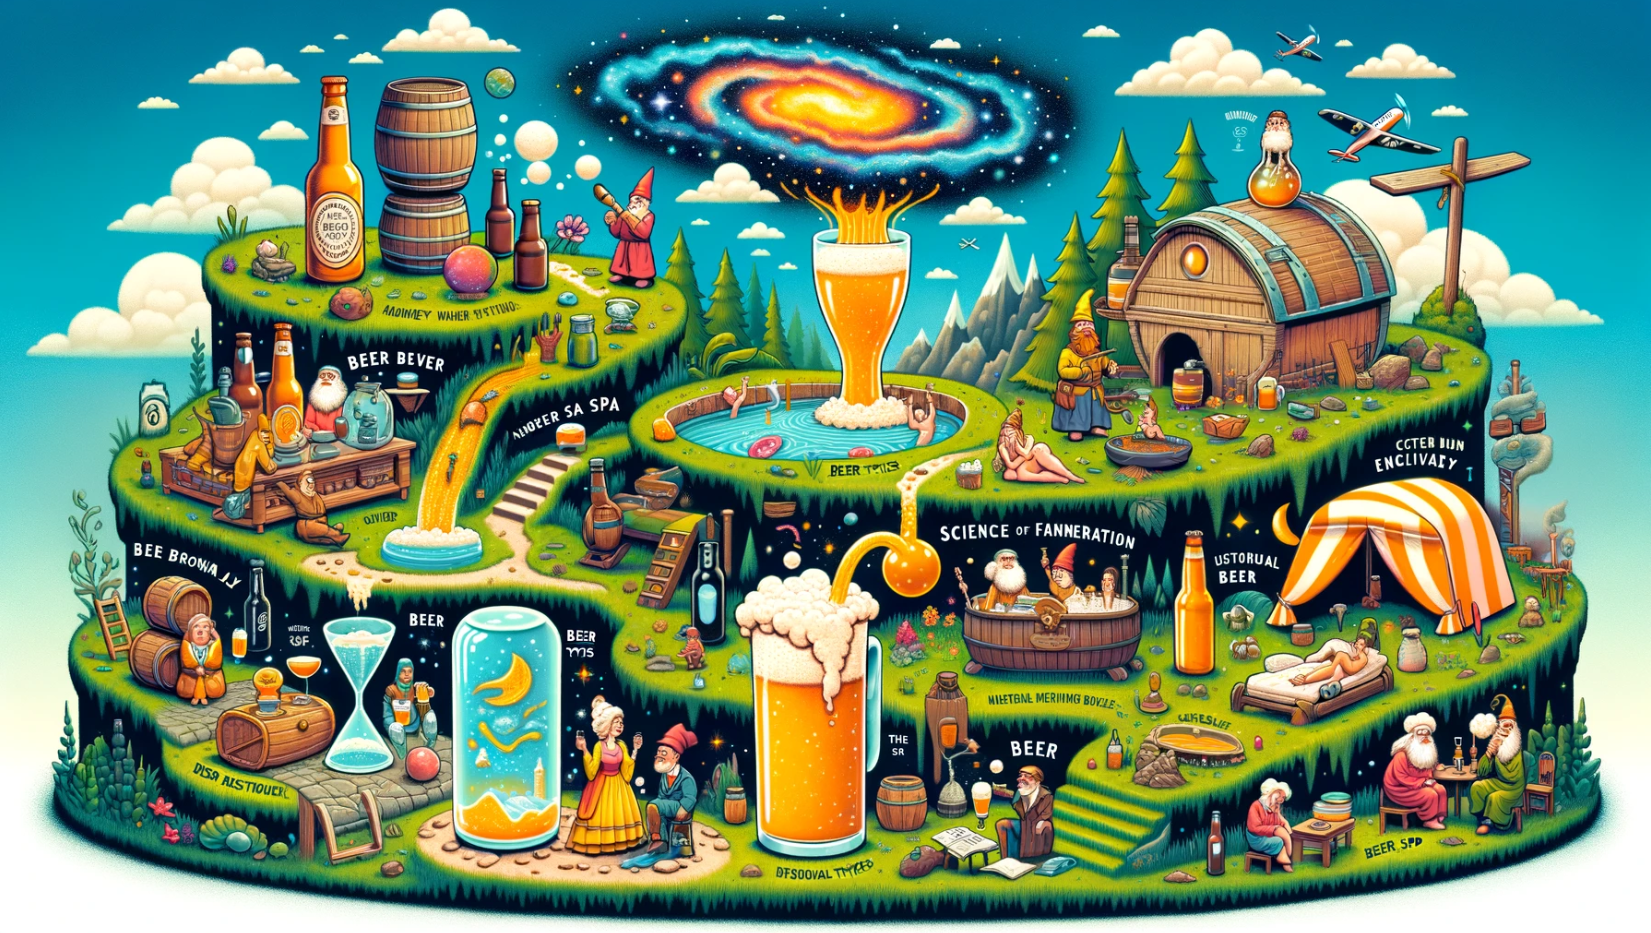 Beer: 7 Ways that Beer Changed the World